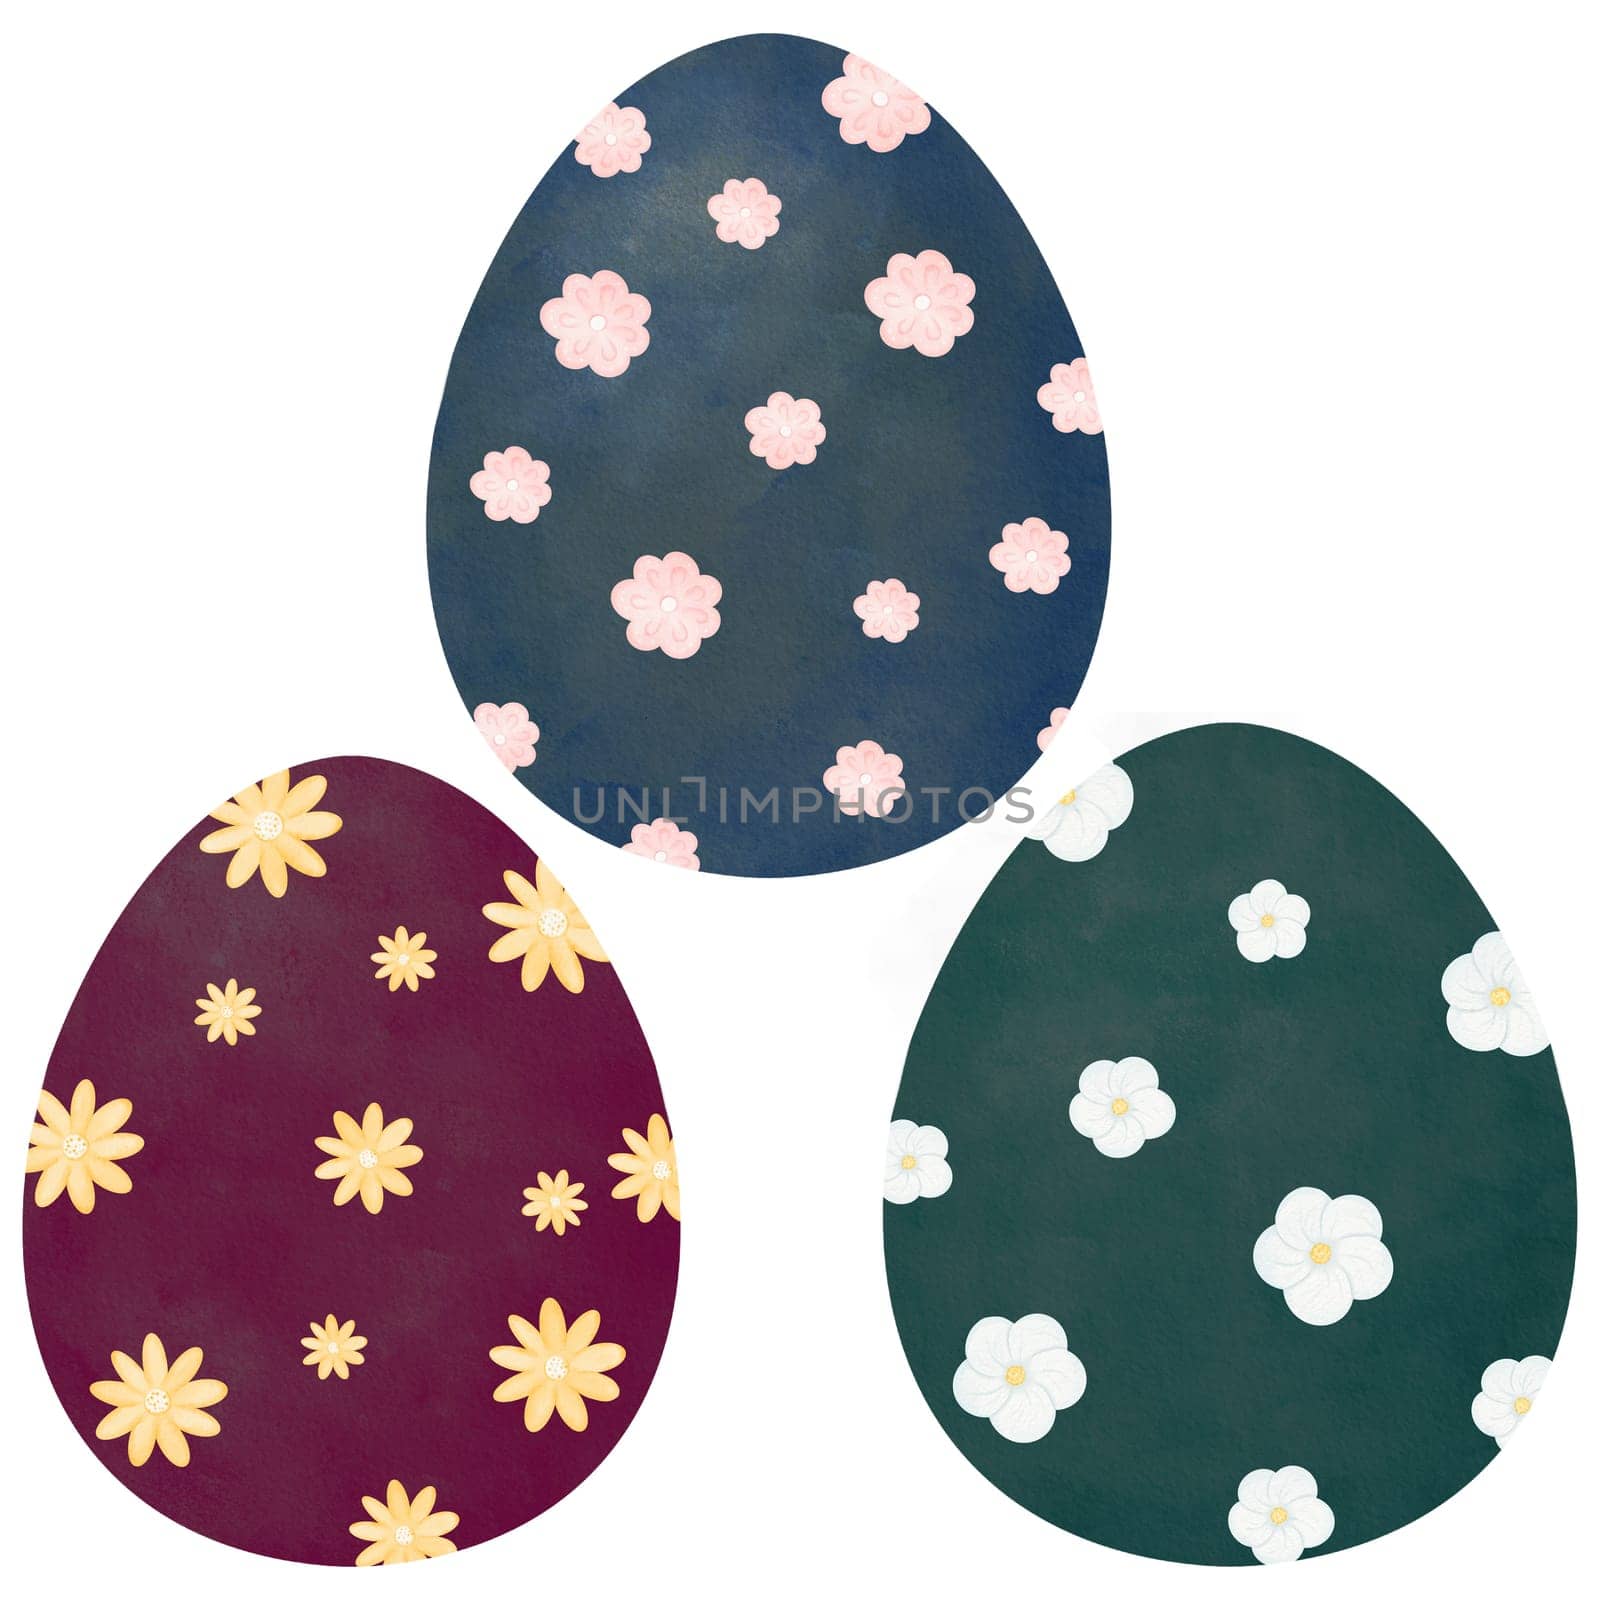 Set of dark watercolor eggs adorned with flowers. A versatile collection for adding an artistic and floral touch to various creative projects, including textiles, posters, invitations, and more.